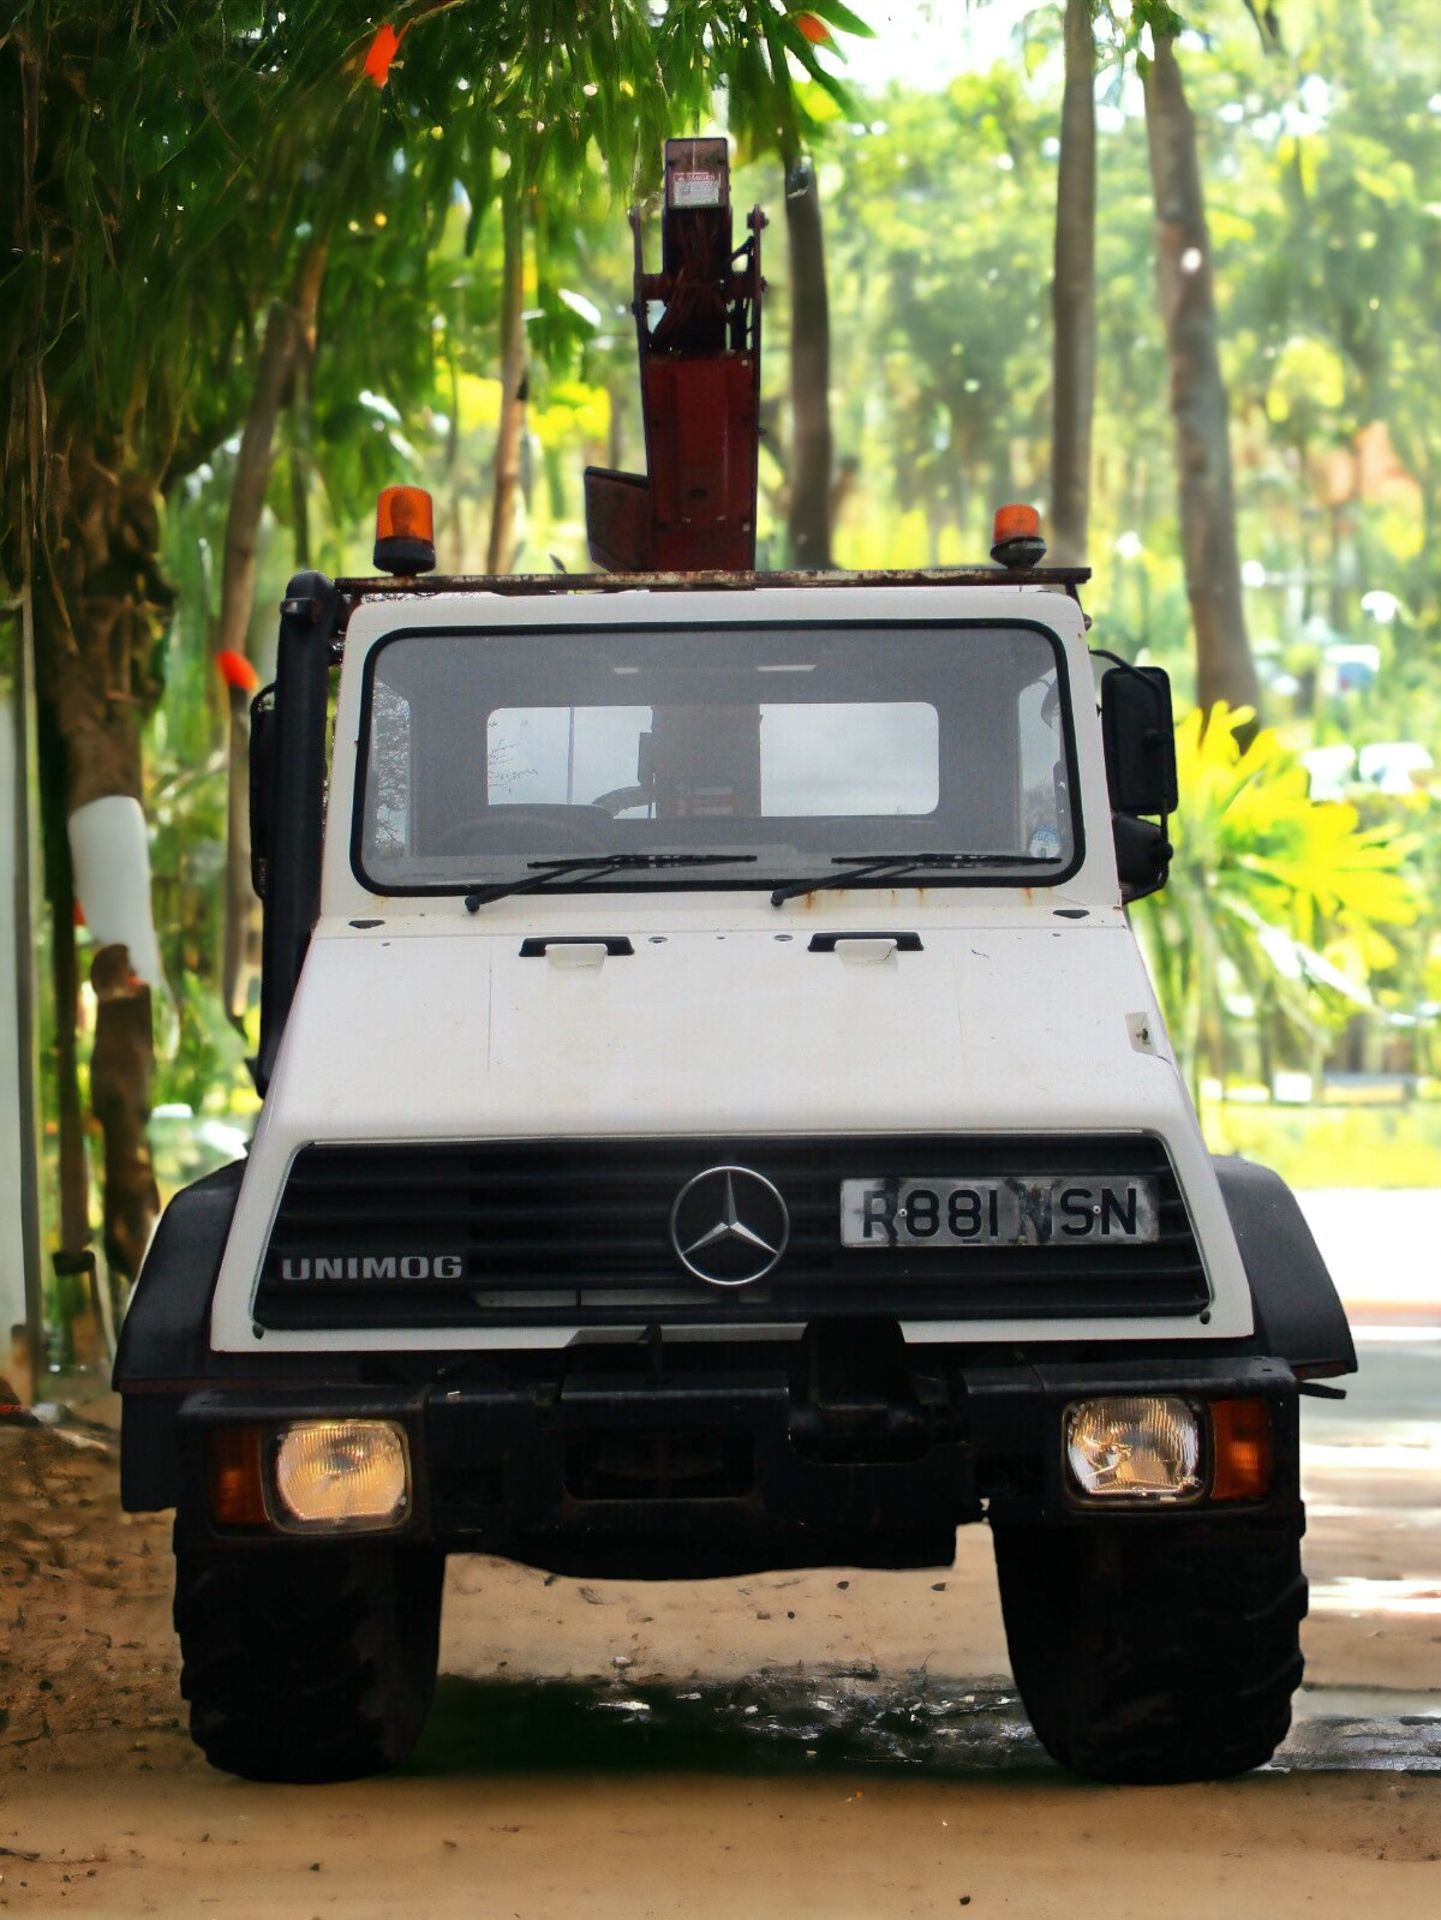 UNIMOG U100L TURBO CHERRY PICKER - REACH NEW HEIGHTS WITH CONFIDENCE! - Image 6 of 23